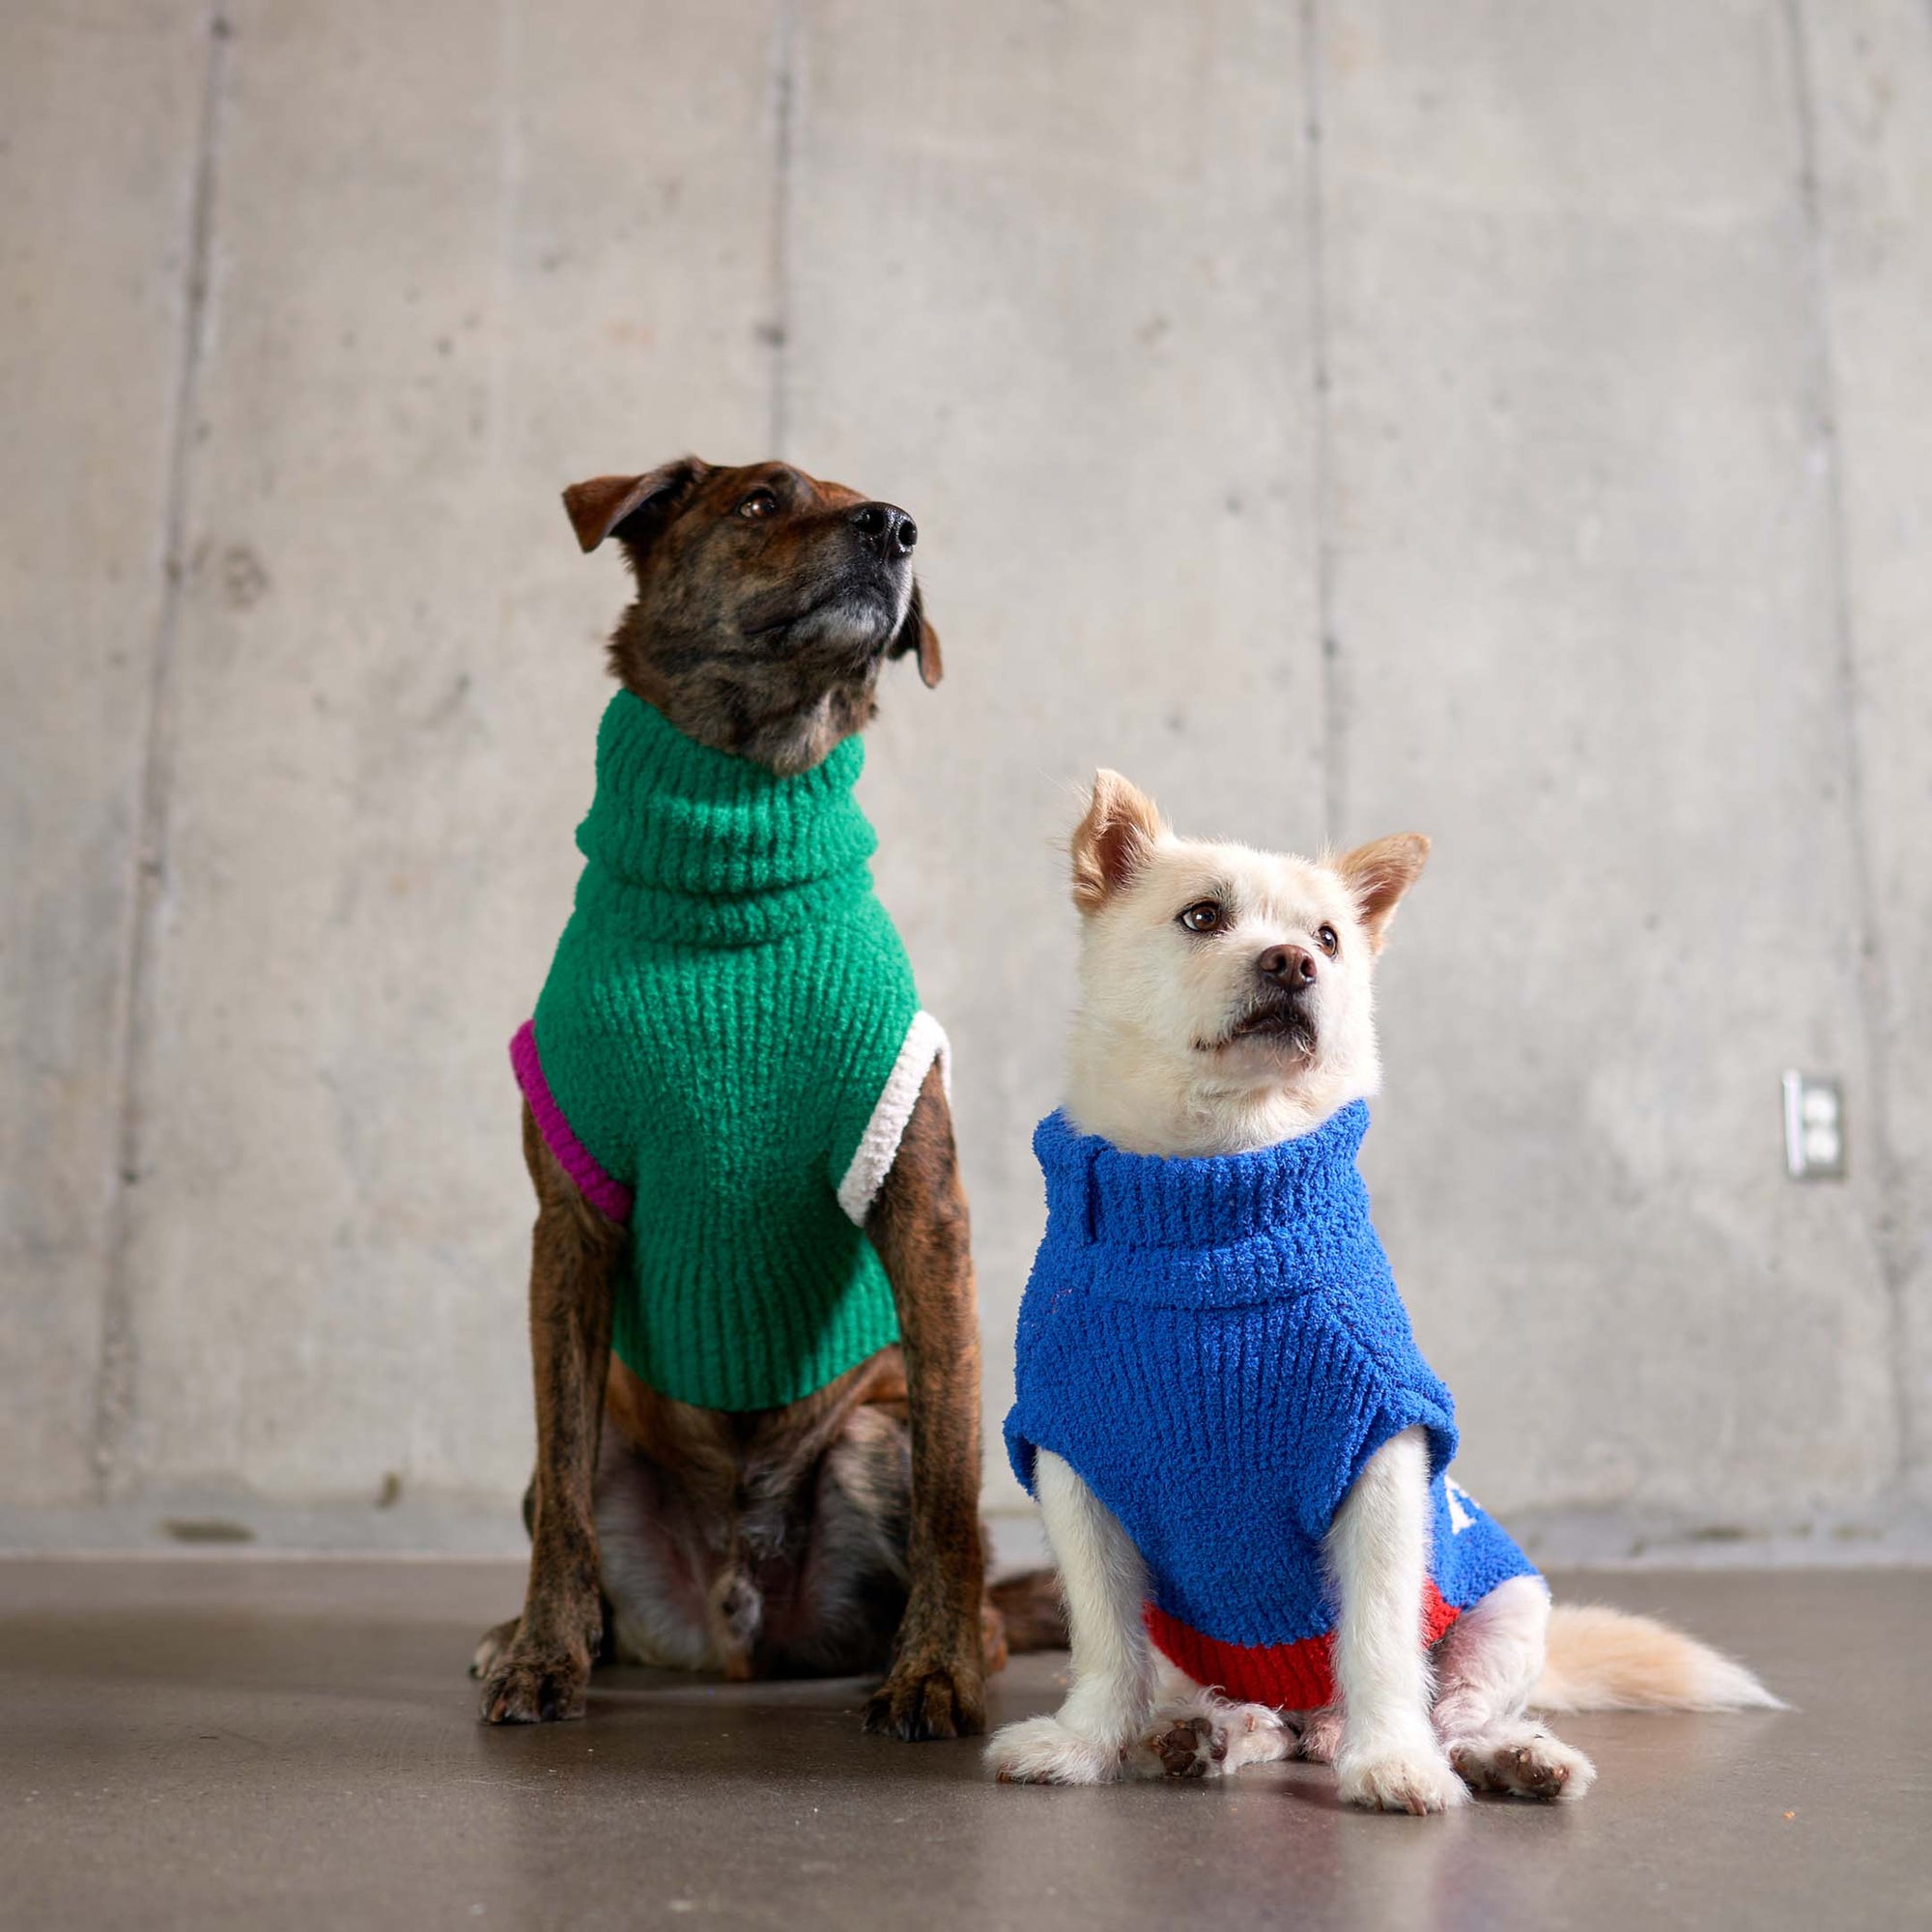 A brindle dog in a vibrant green "Uniquely You" sweater and a smaller dog in a blue sweater with a red hem gaze upwards against a minimalist concrete background, embodying a stylish and attentive demeanor.